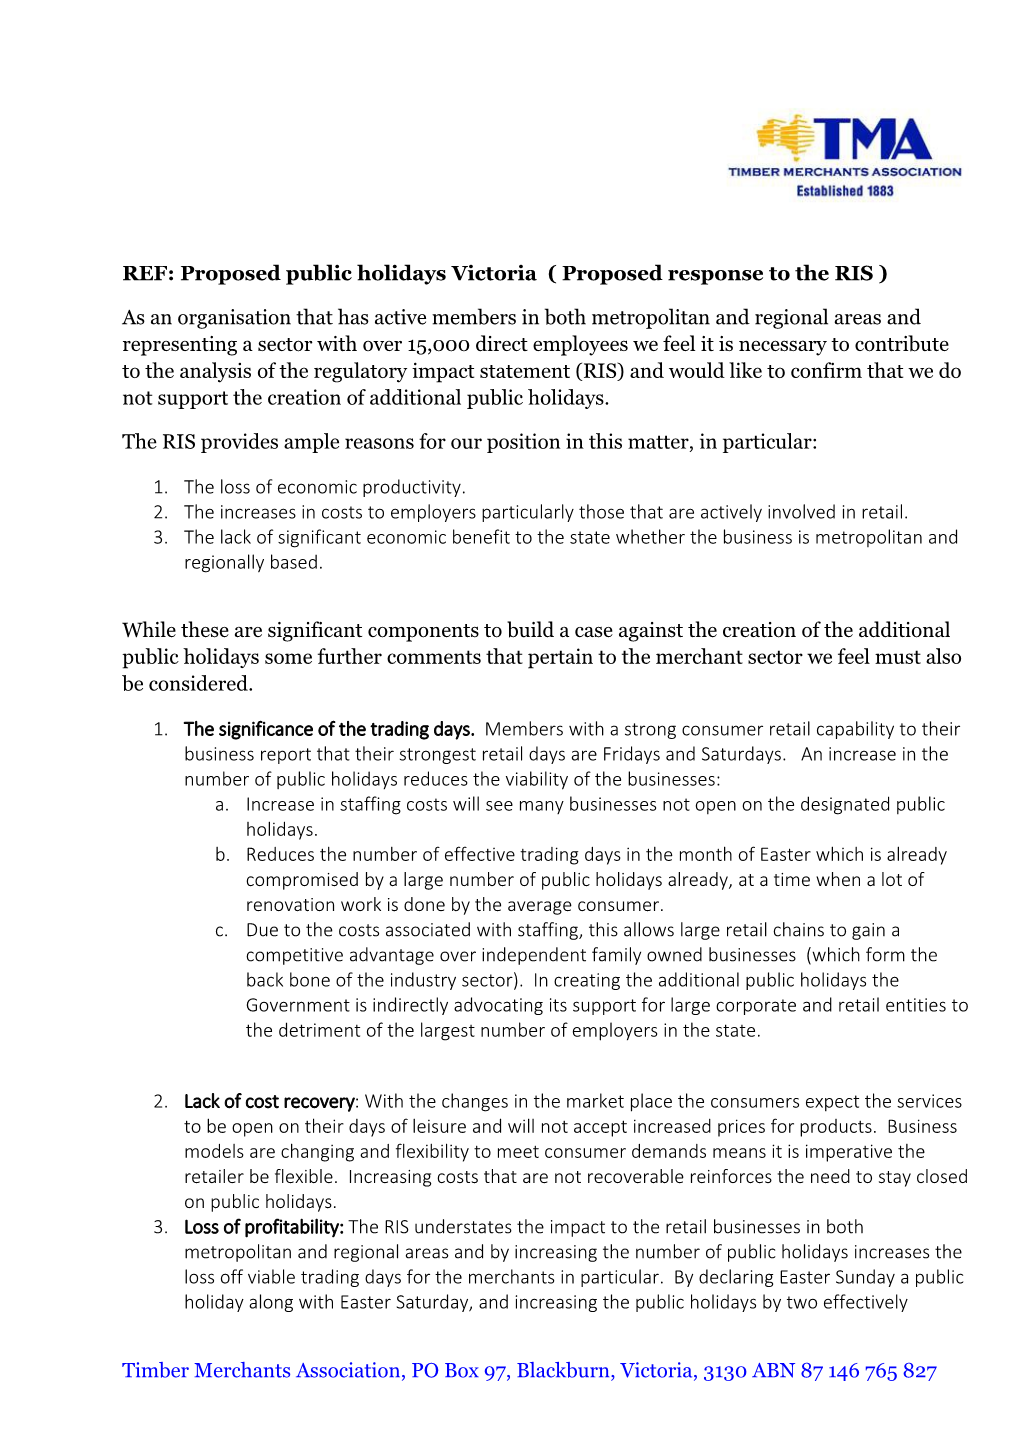 REF: Proposed Public Holidays Victoria ( Proposed Response to the RIS )